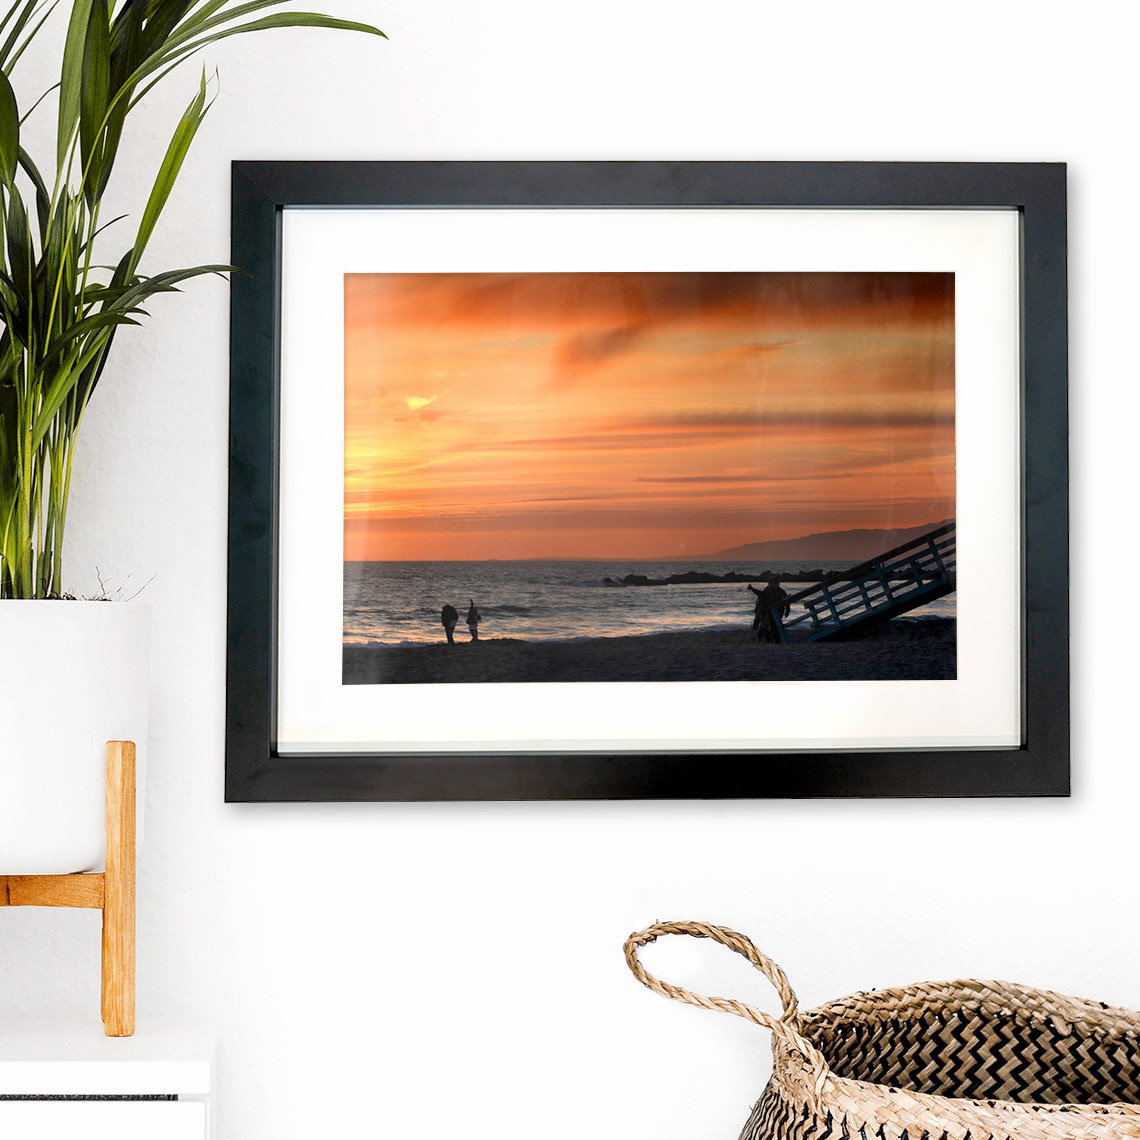 45x30cm Framed Print with Mount